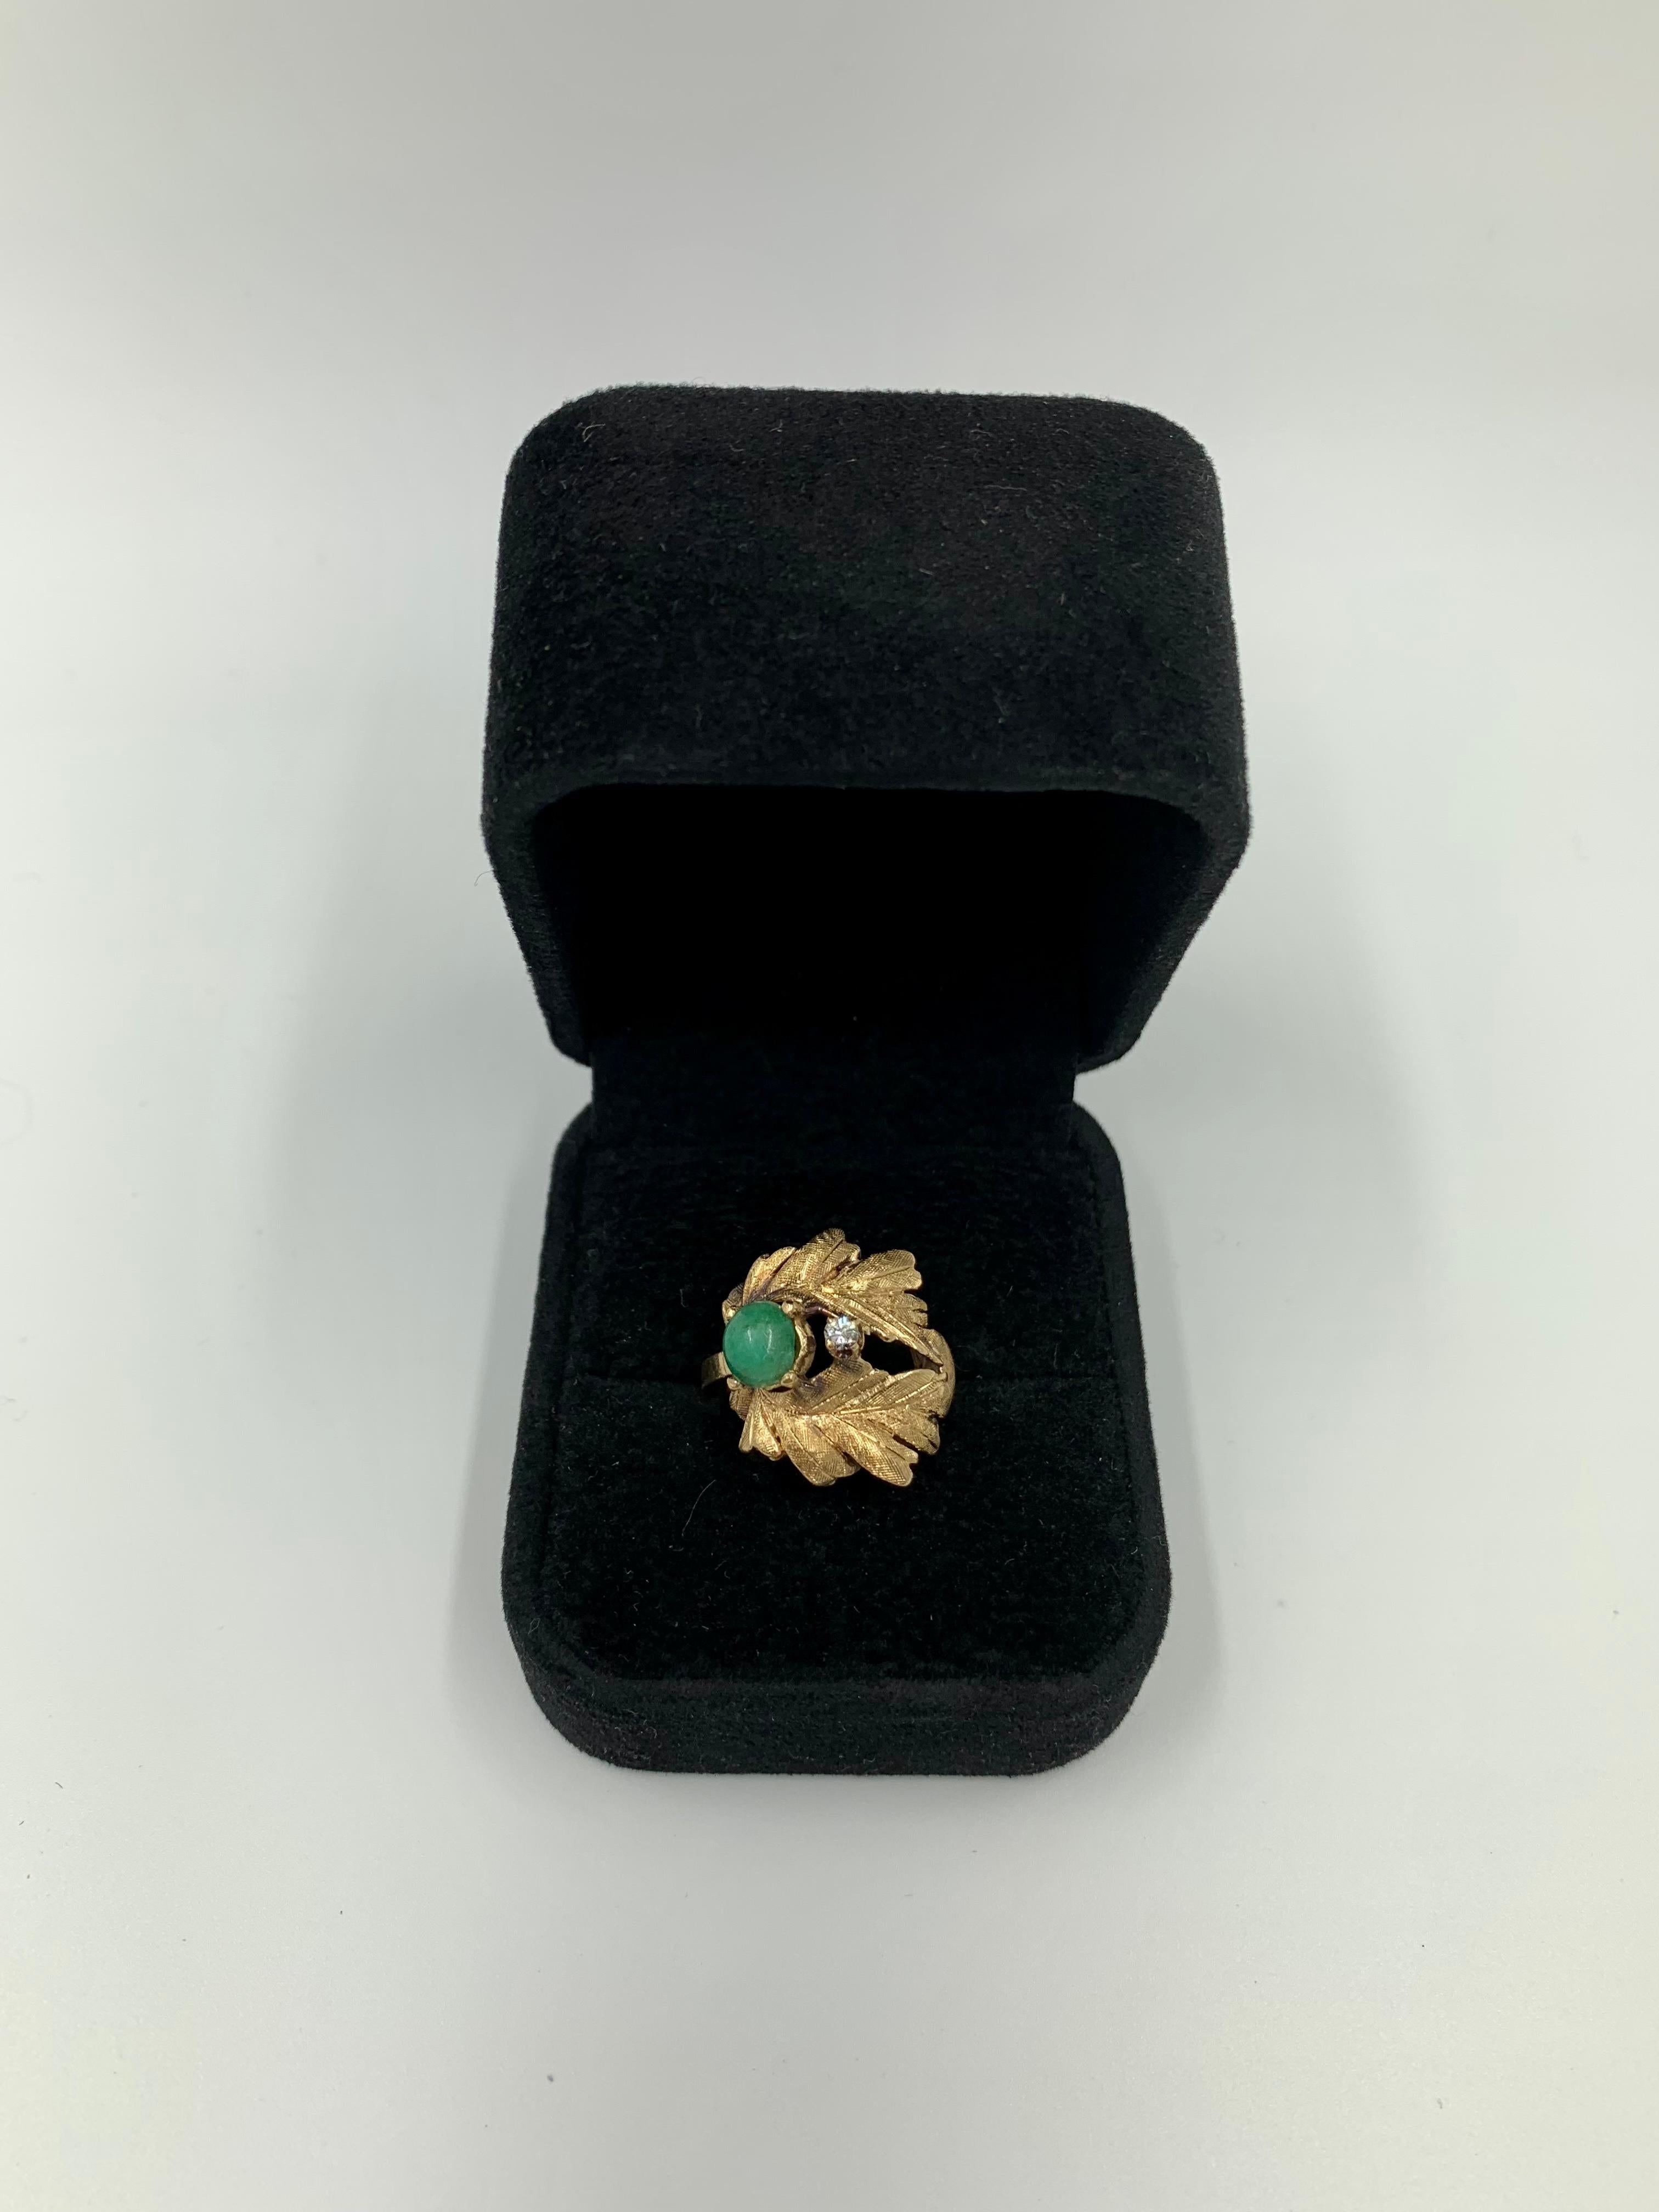 Unusual Mid Century 14k gold, diamond and cabochon chrysoprase textured Laurel Wreath ring.
Fine minute crosshatching detail on the highly original design of the gold wreath elements, beautiful workmanship. 
The Laurel Wreath was used in Ancient